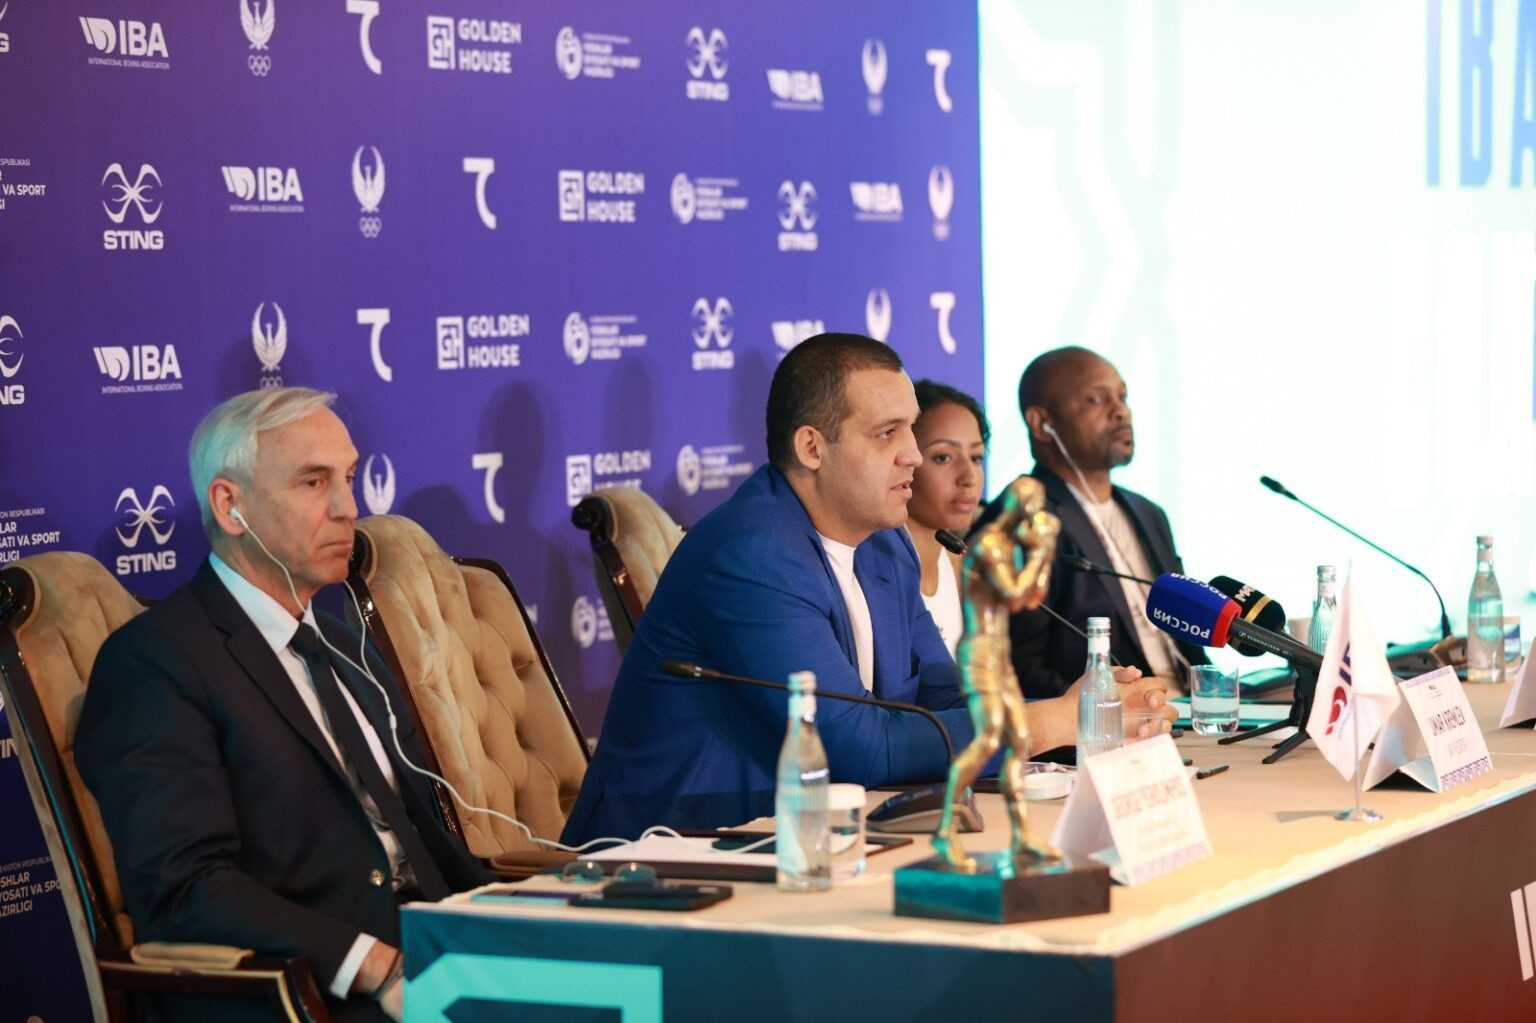 The International Boxing Association, led by Umar Kremlev, centre, has announced it will allow boxers and officials to participate at the European Games as a "goodwill gestures towards the IOC" ©IBA